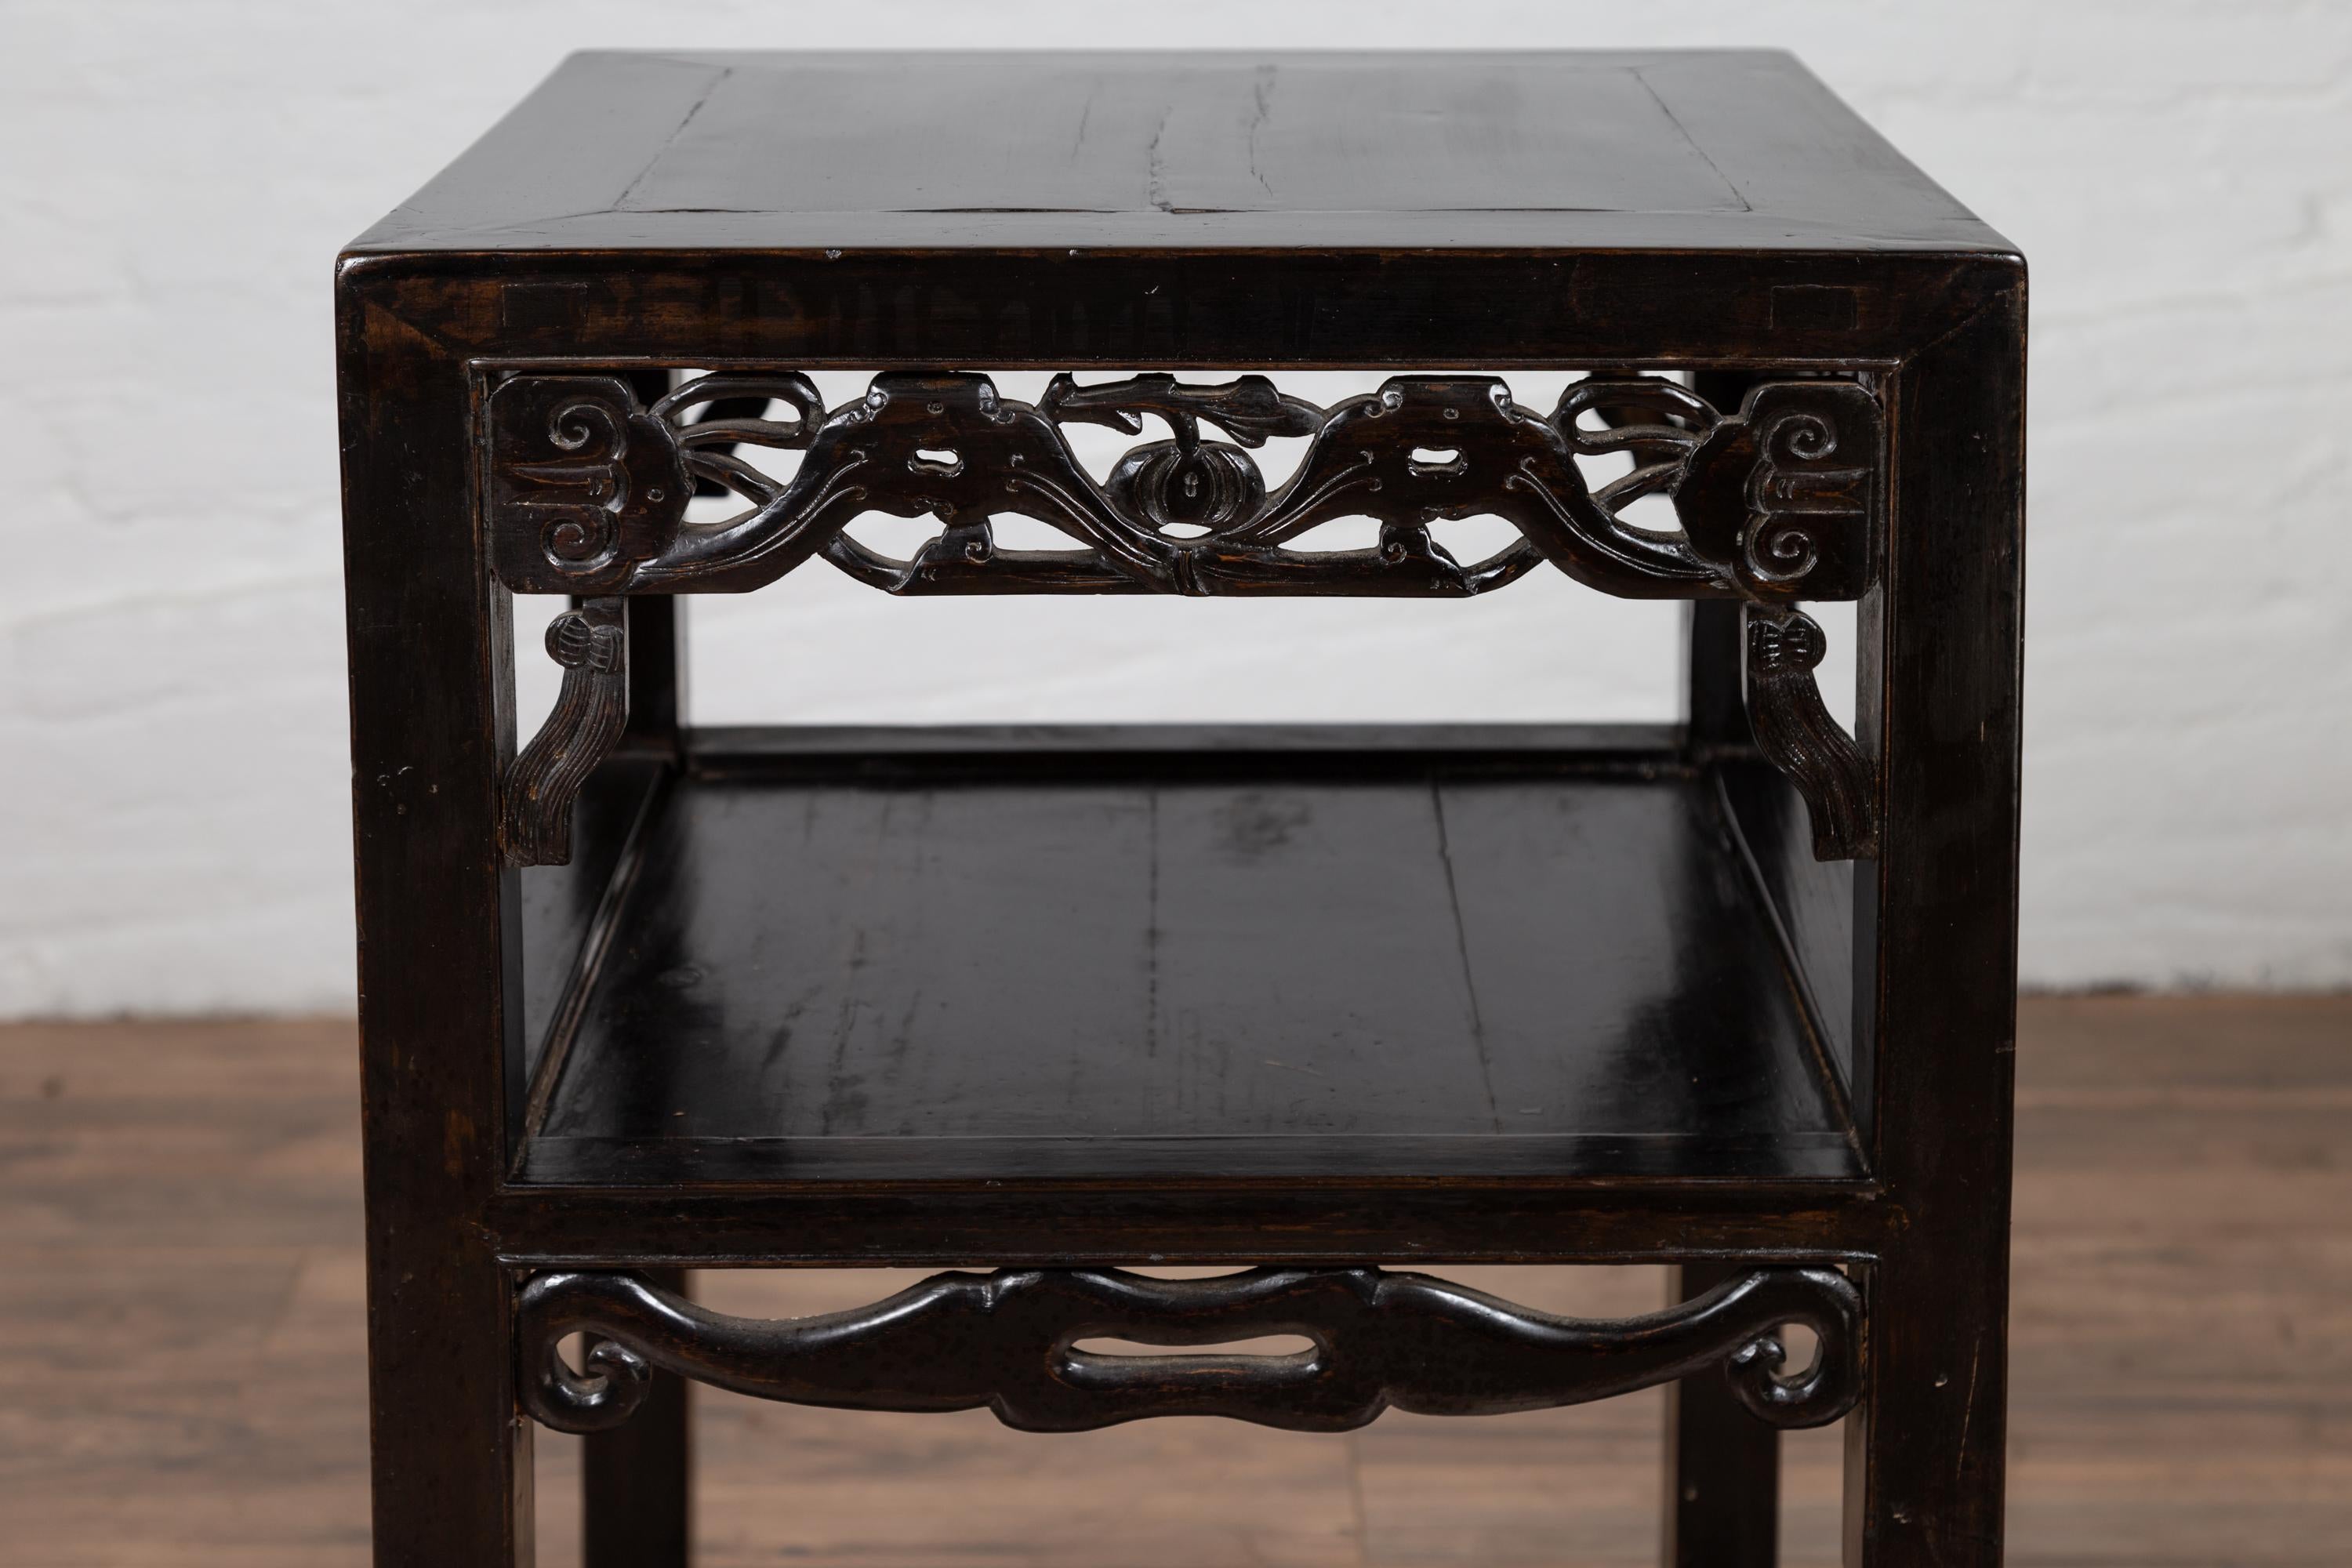 20th Century Antique Chinese Lamp Table with Dark Patina, Pierced Apron and Geometric Design